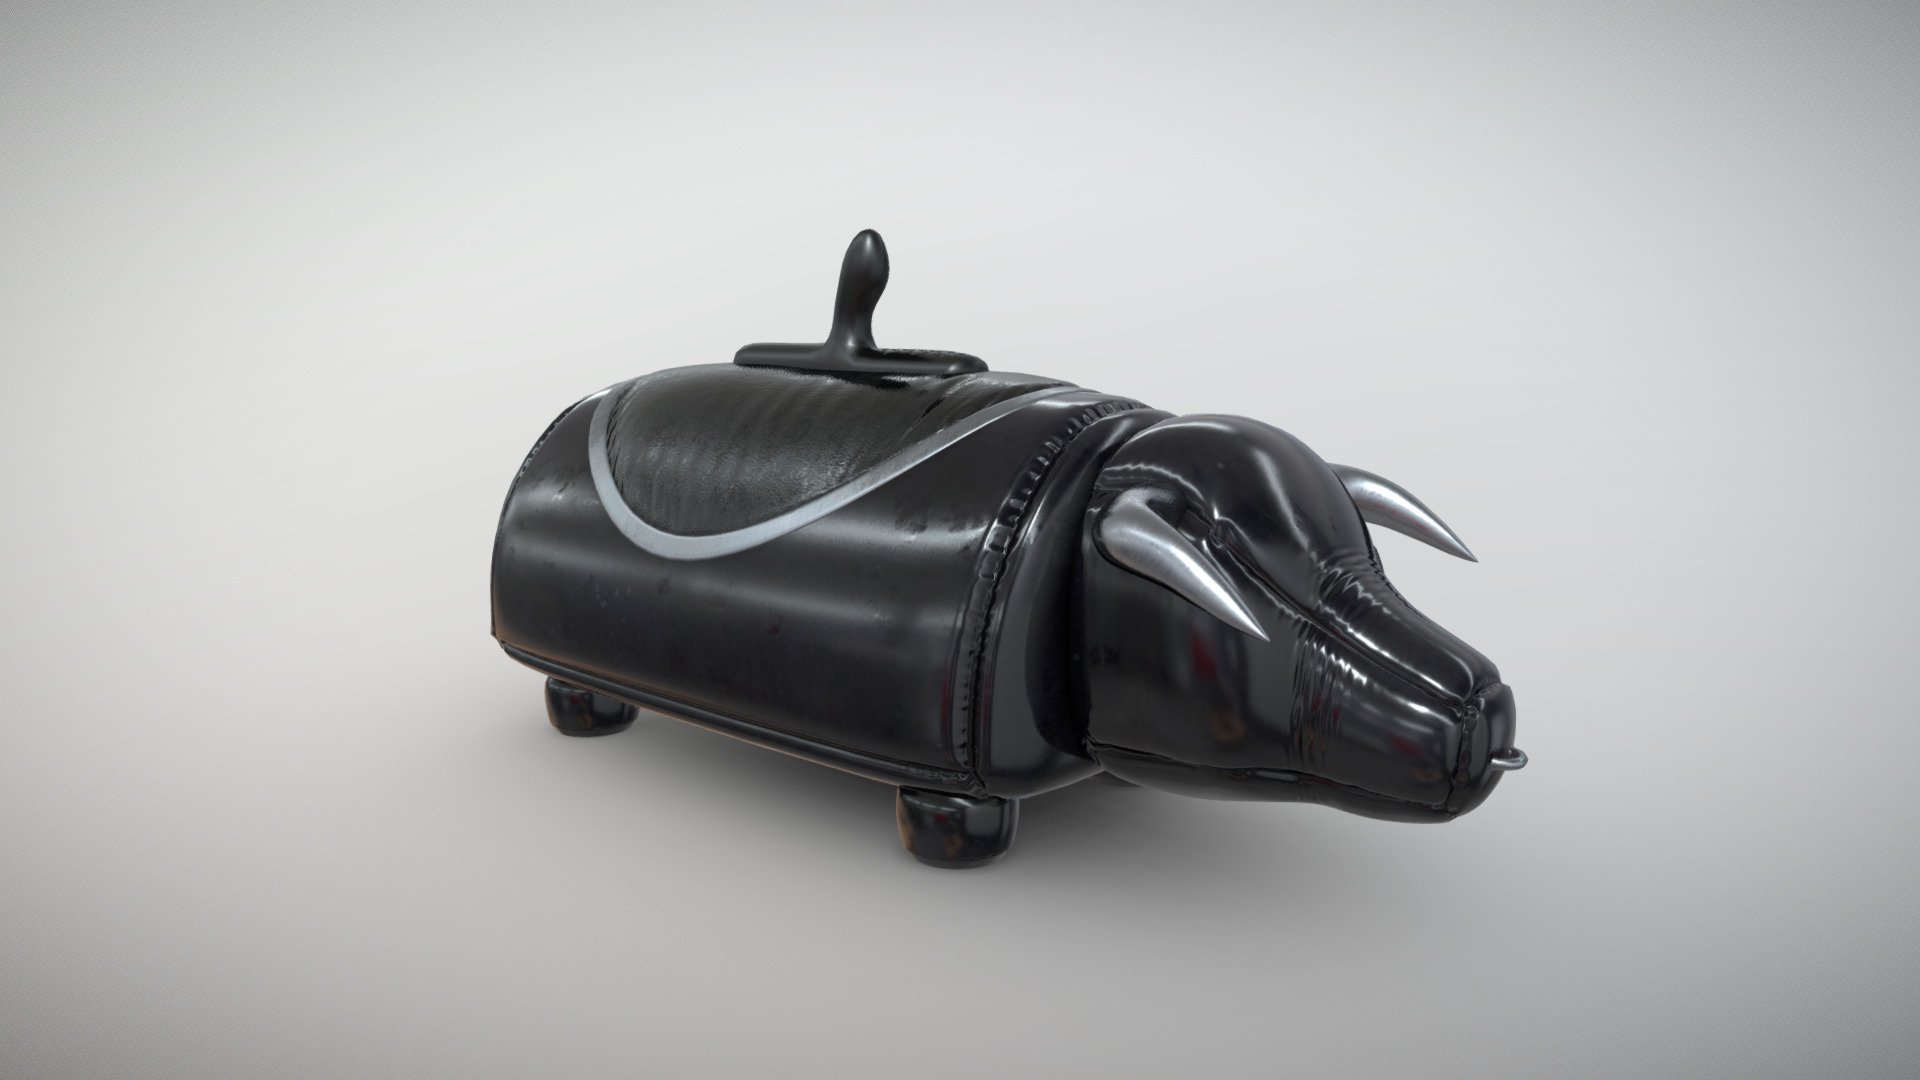 Bull Sybian. Black latex, steel and black leather. 

Made in Blender (modeling and unwarping) then textured and baked in Substance Painter - Bull Sybian - 3D model by wlodarski3d 3d model